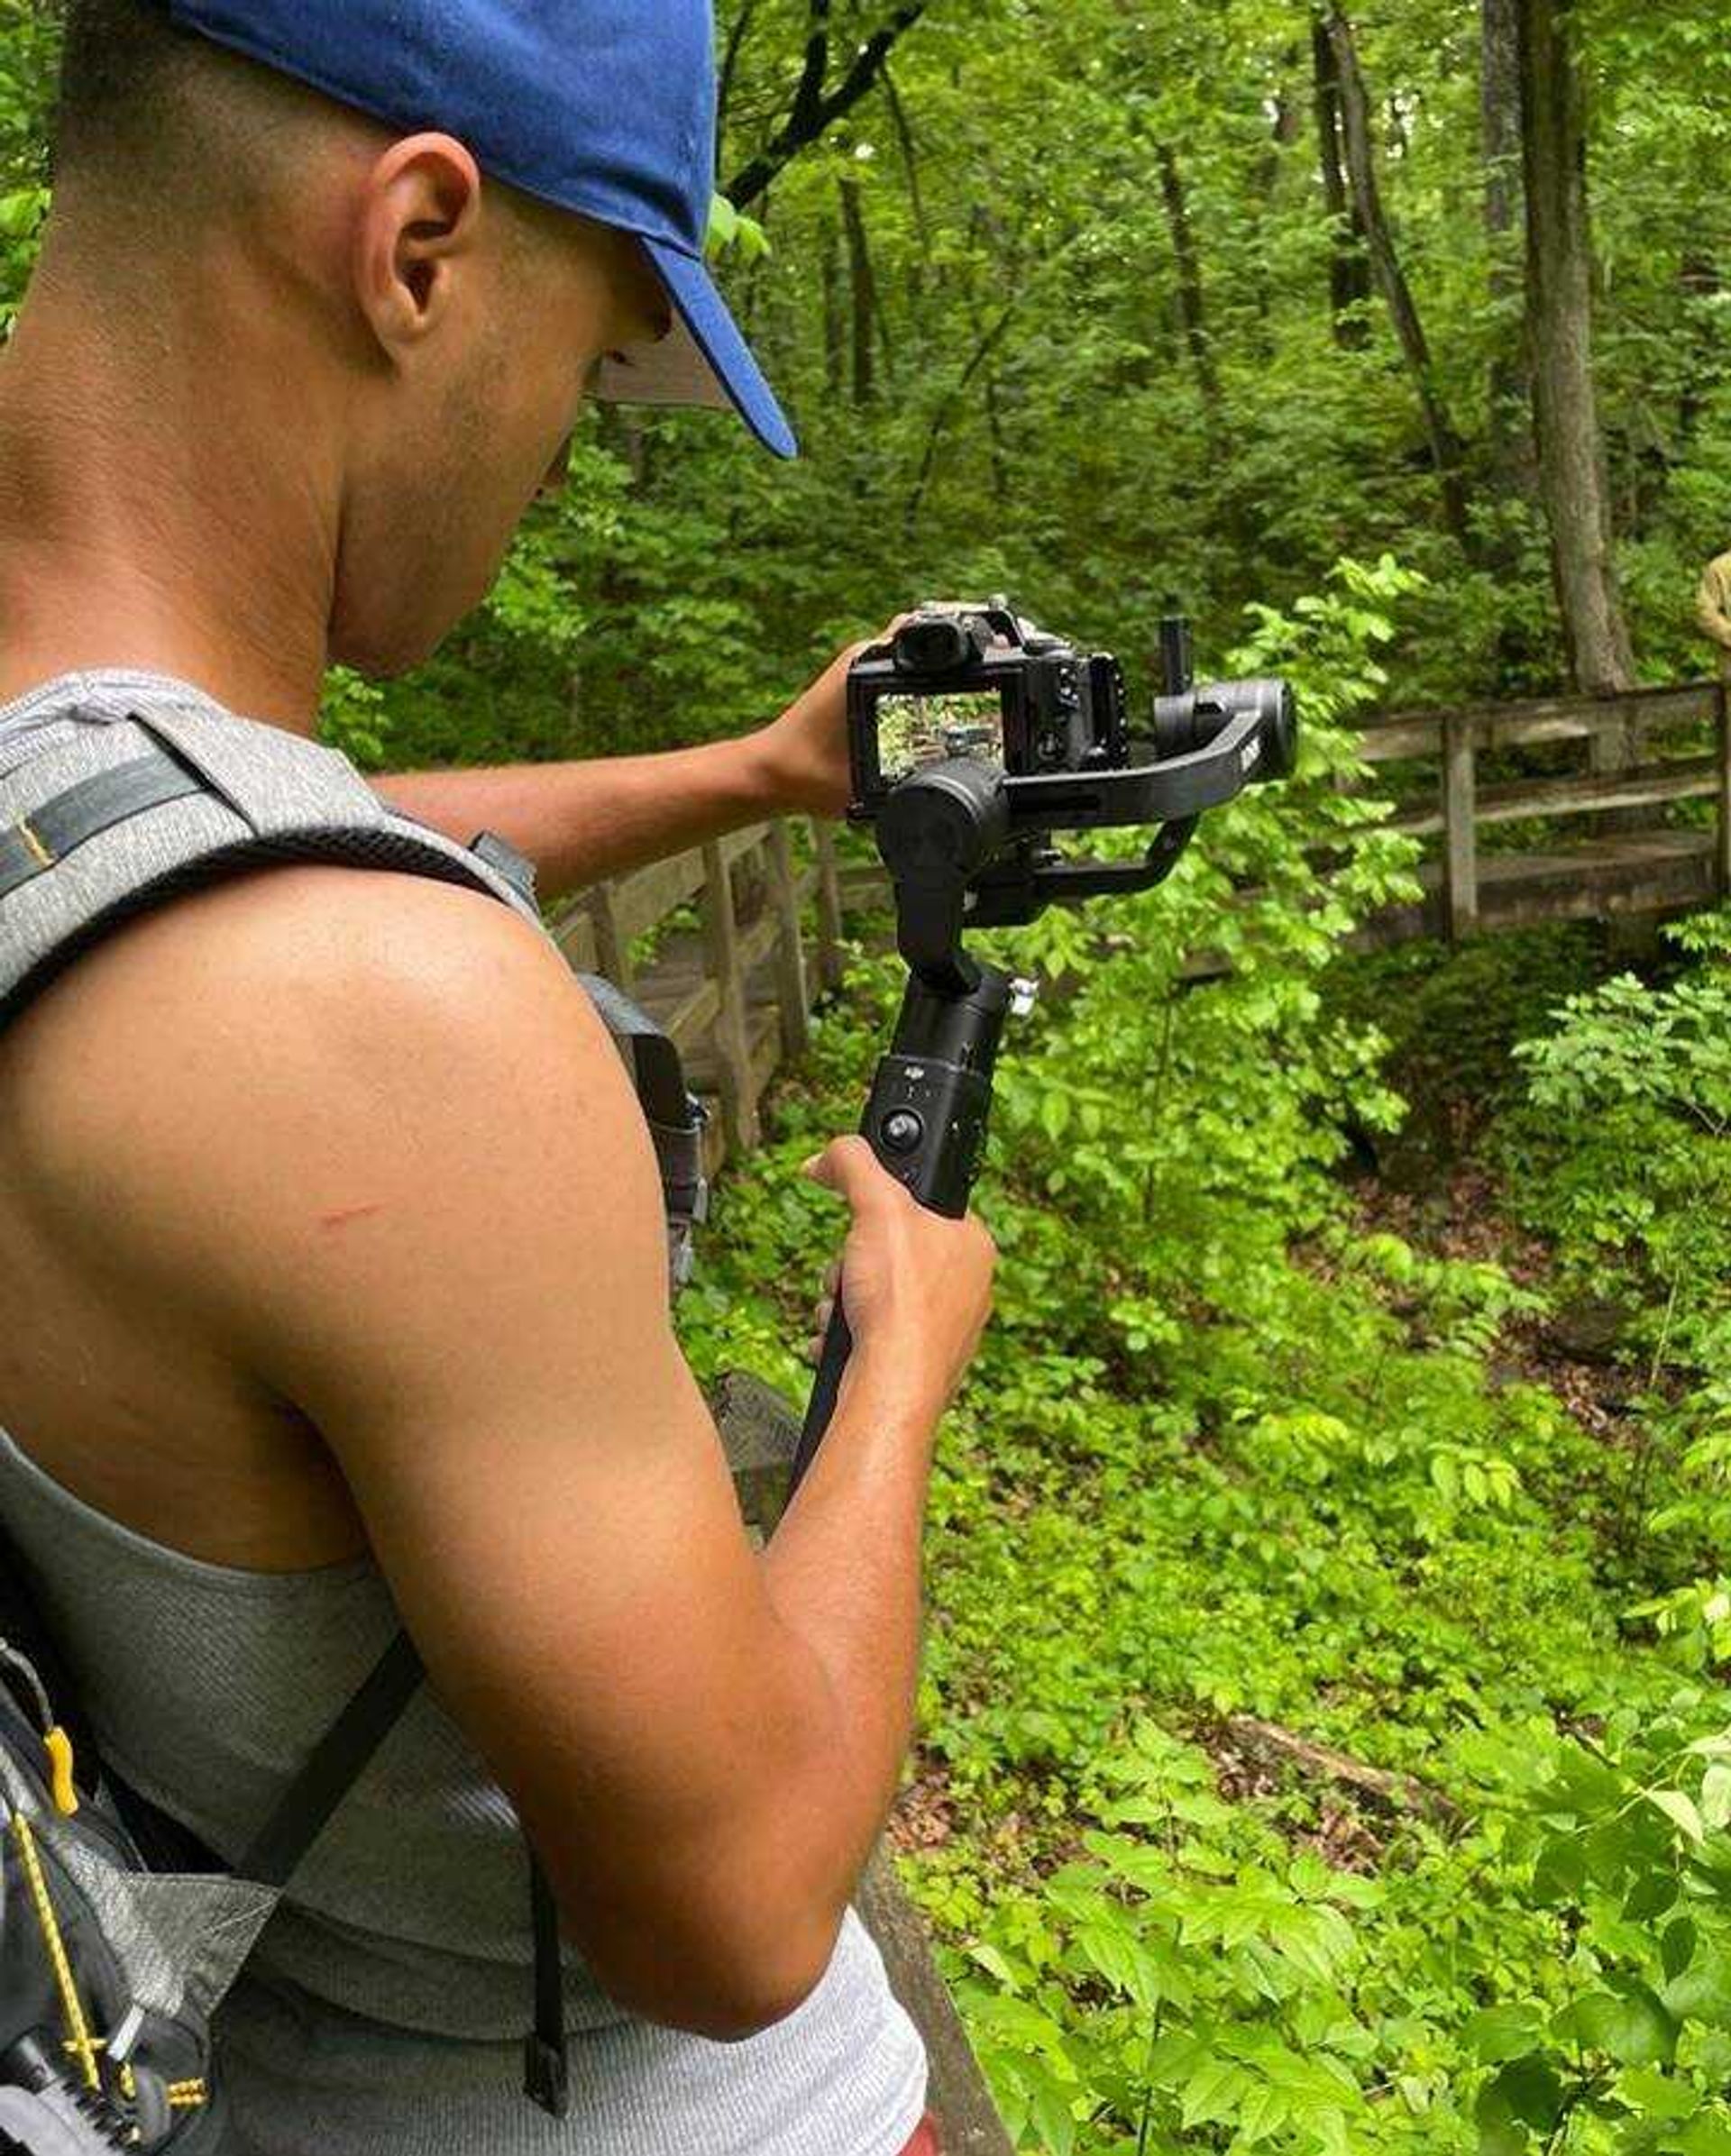 Super Senior Thomas Eutzy at Inspiration Point Trails in Illinois using his Canon m50 on a Ronin SC Gimble to stabilize.